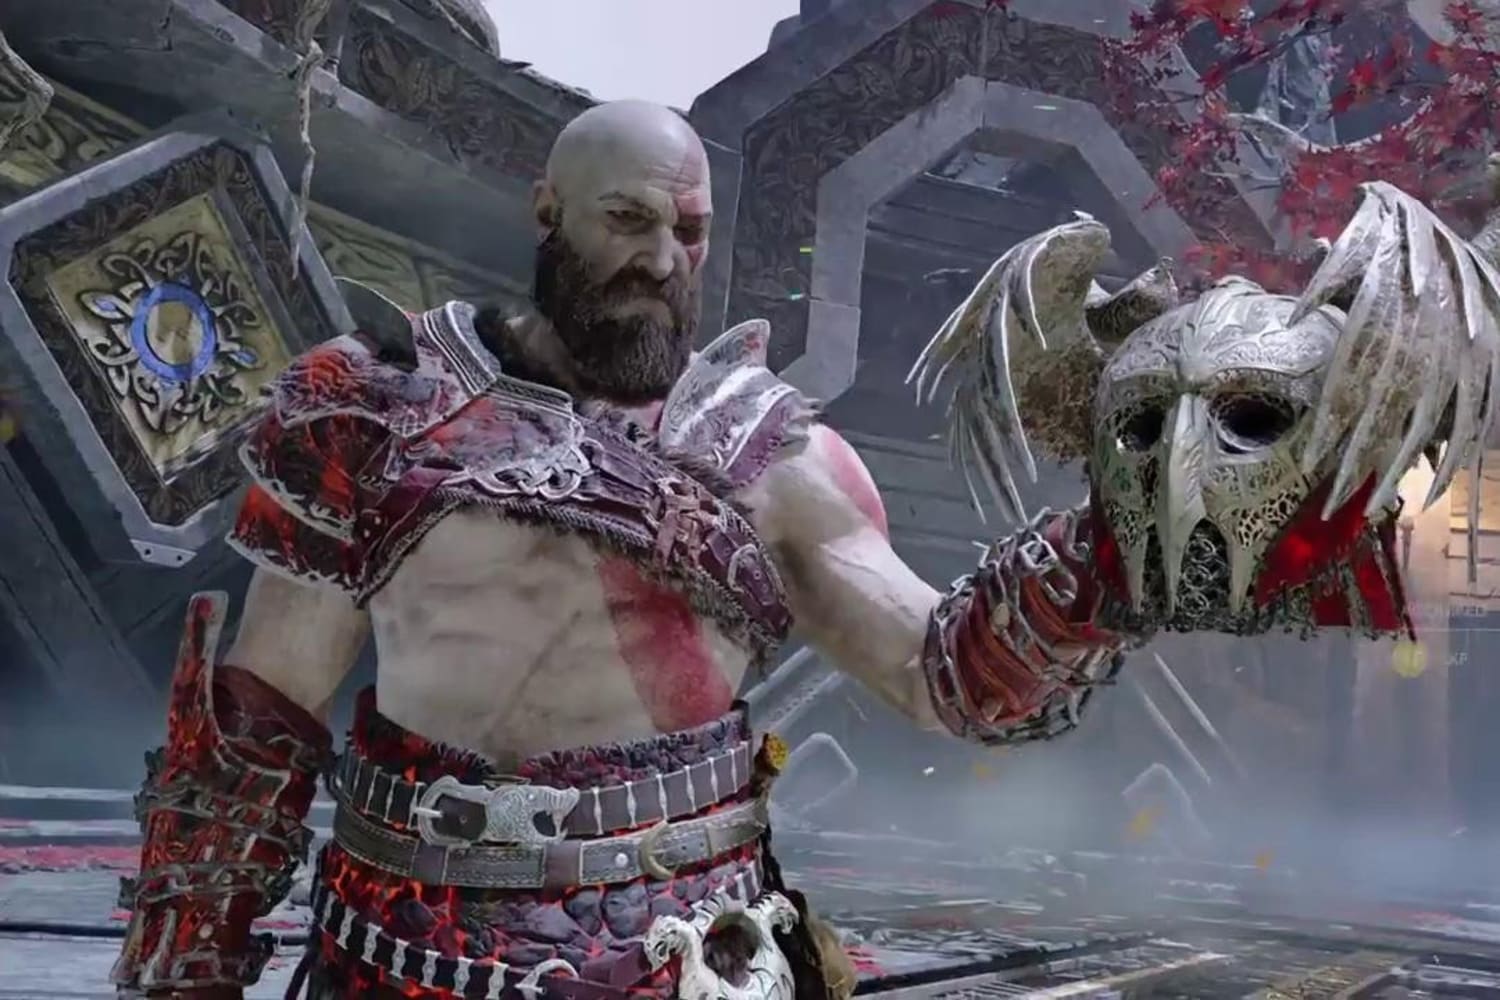 newest god of war for ps4